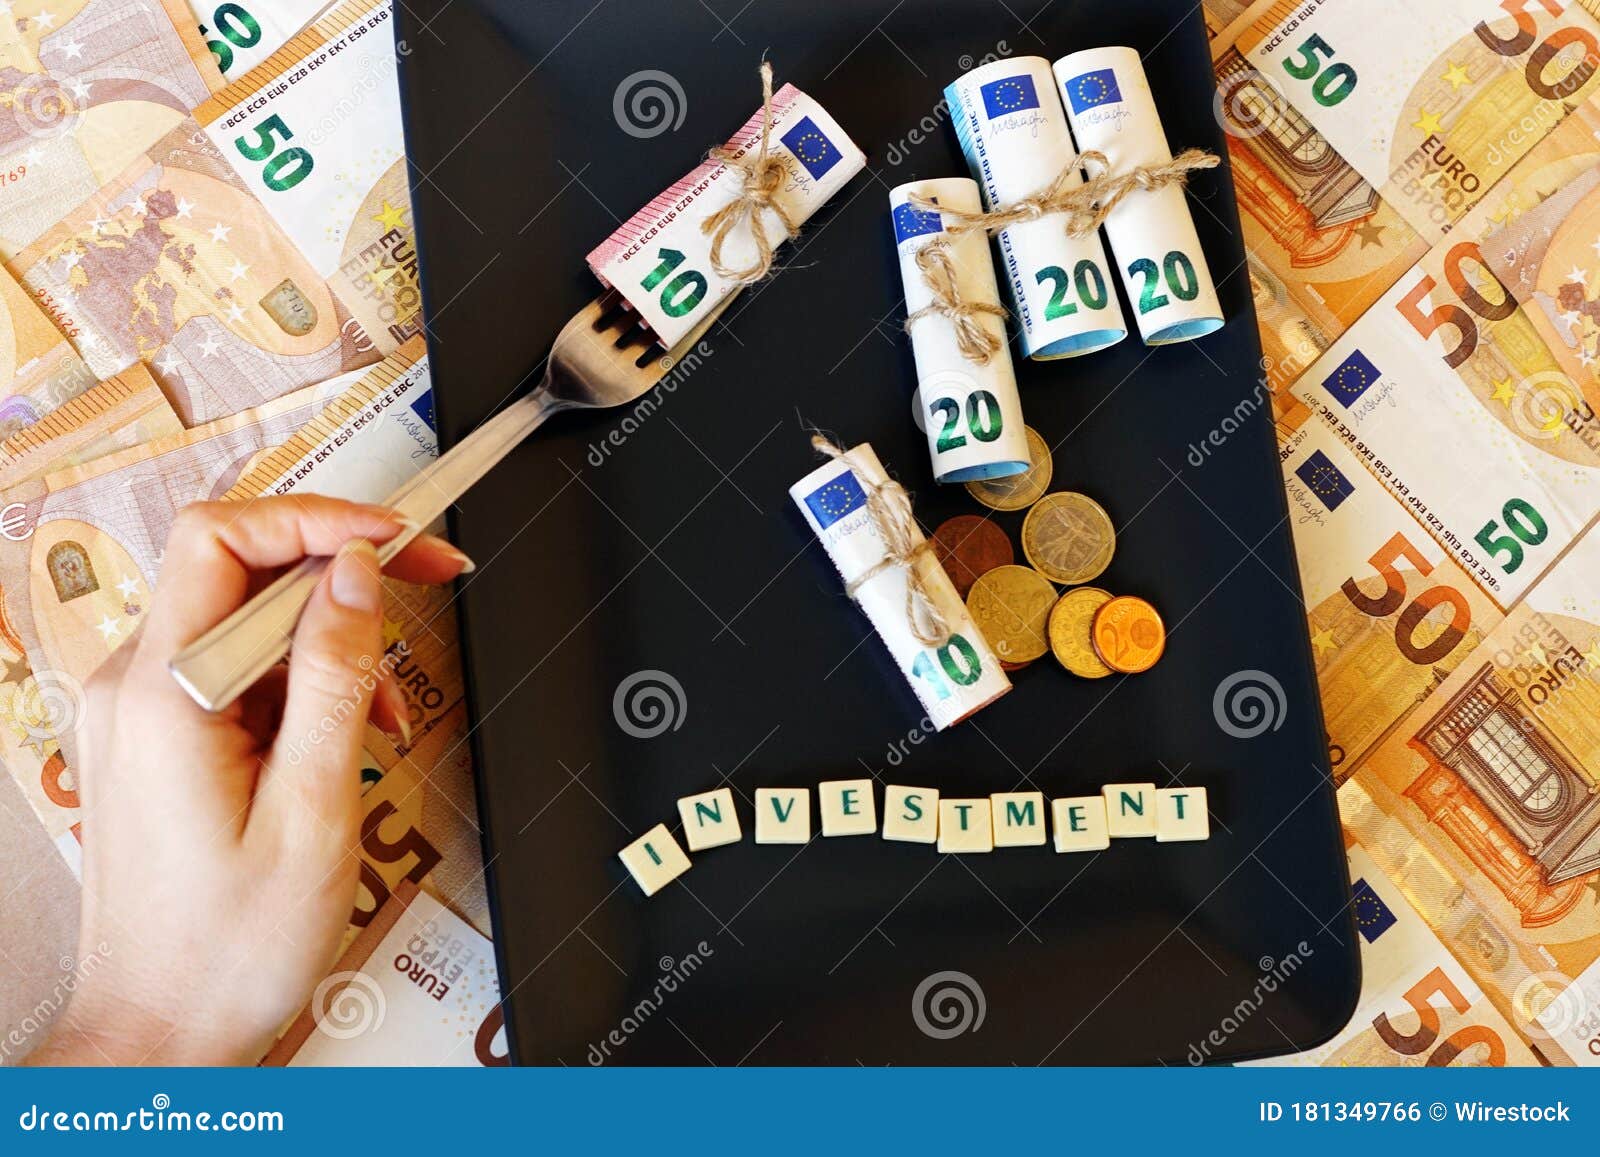 person taking dinero bills with a fork out of the plate - investment concept